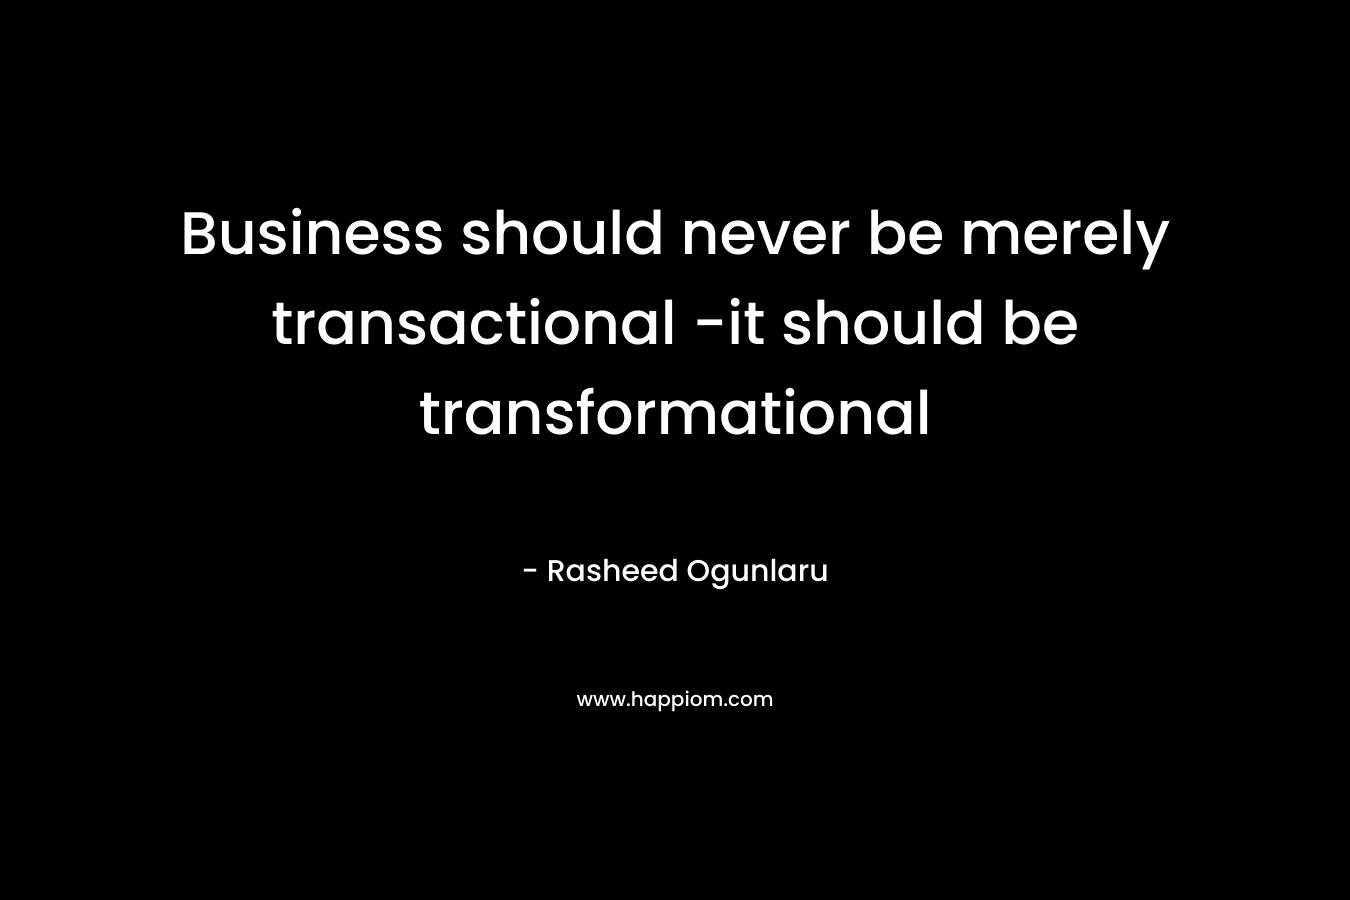 Business should never be merely transactional -it should be transformational